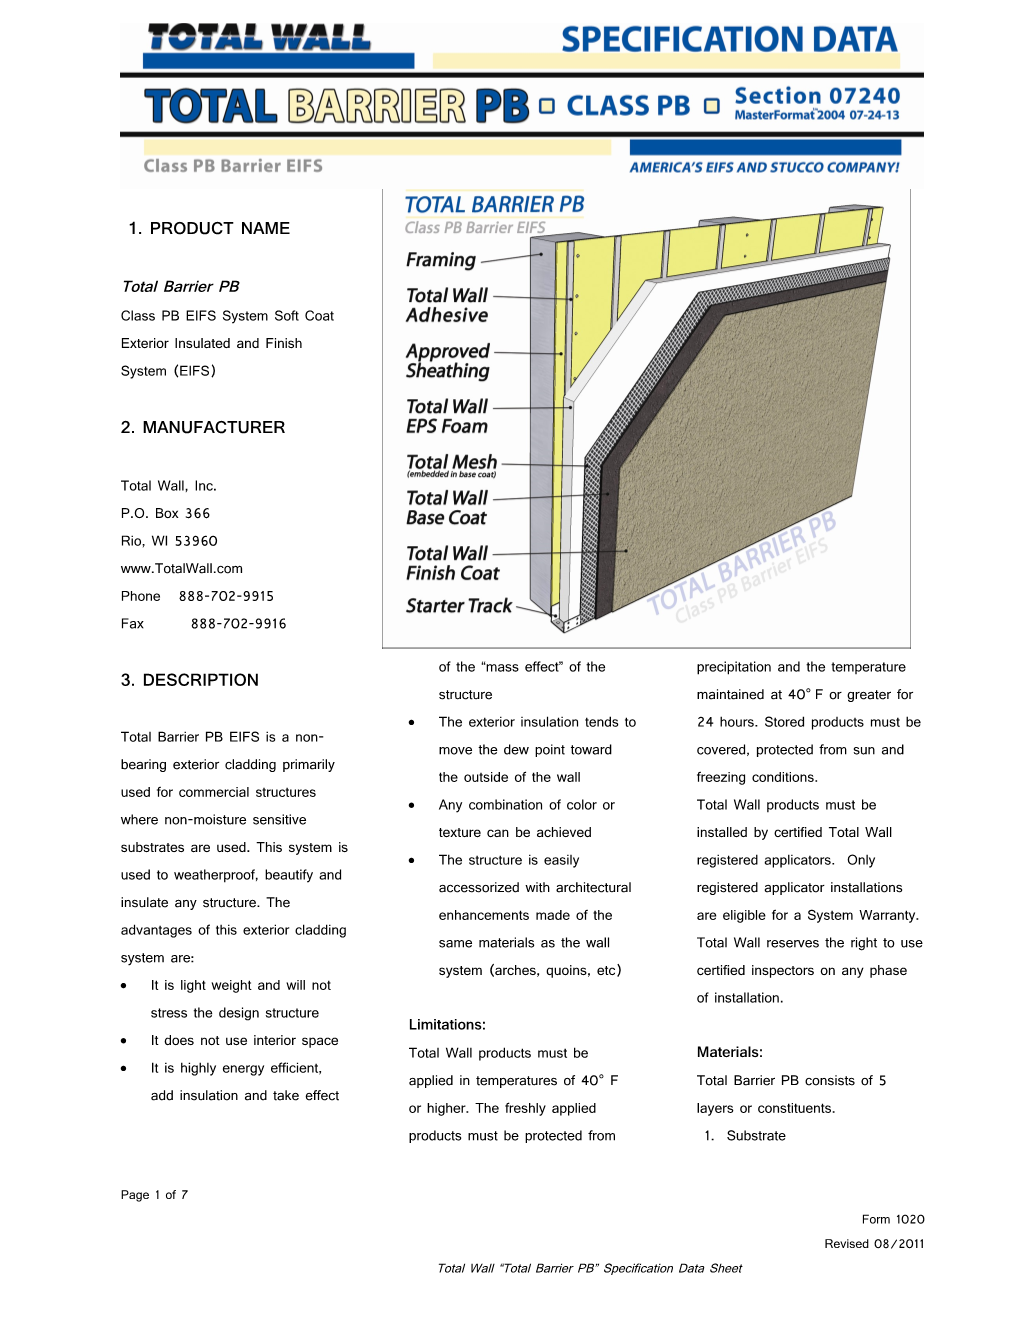 Class PB EIFS System Soft Coat Exterior Insulated and Finish System (EIFS)